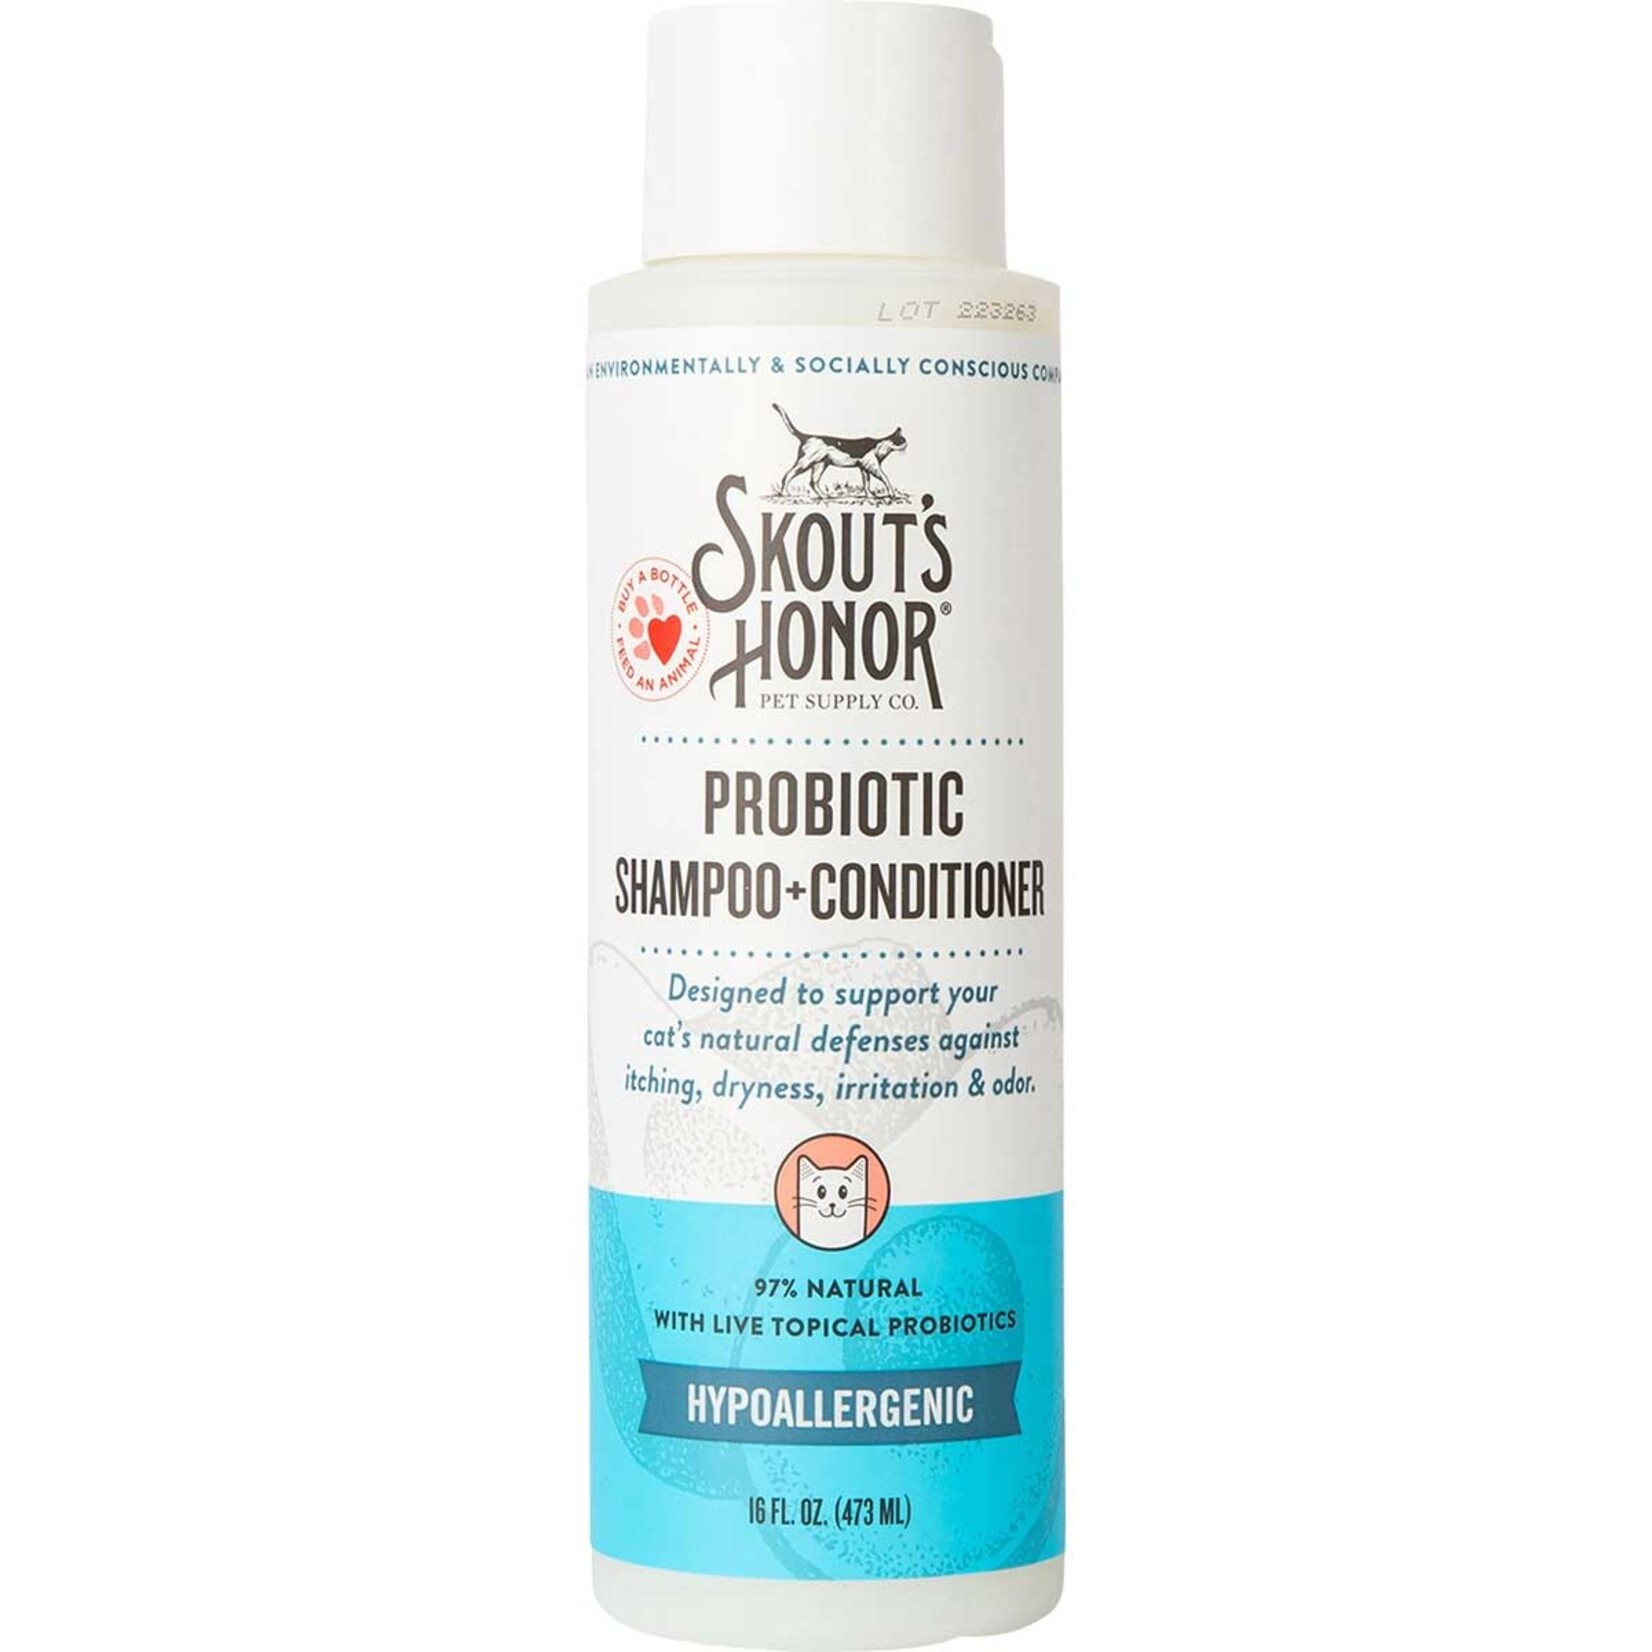 Skout's Honor Skout's Honor Probiotic Cat shampoo + Conditioner Unscented